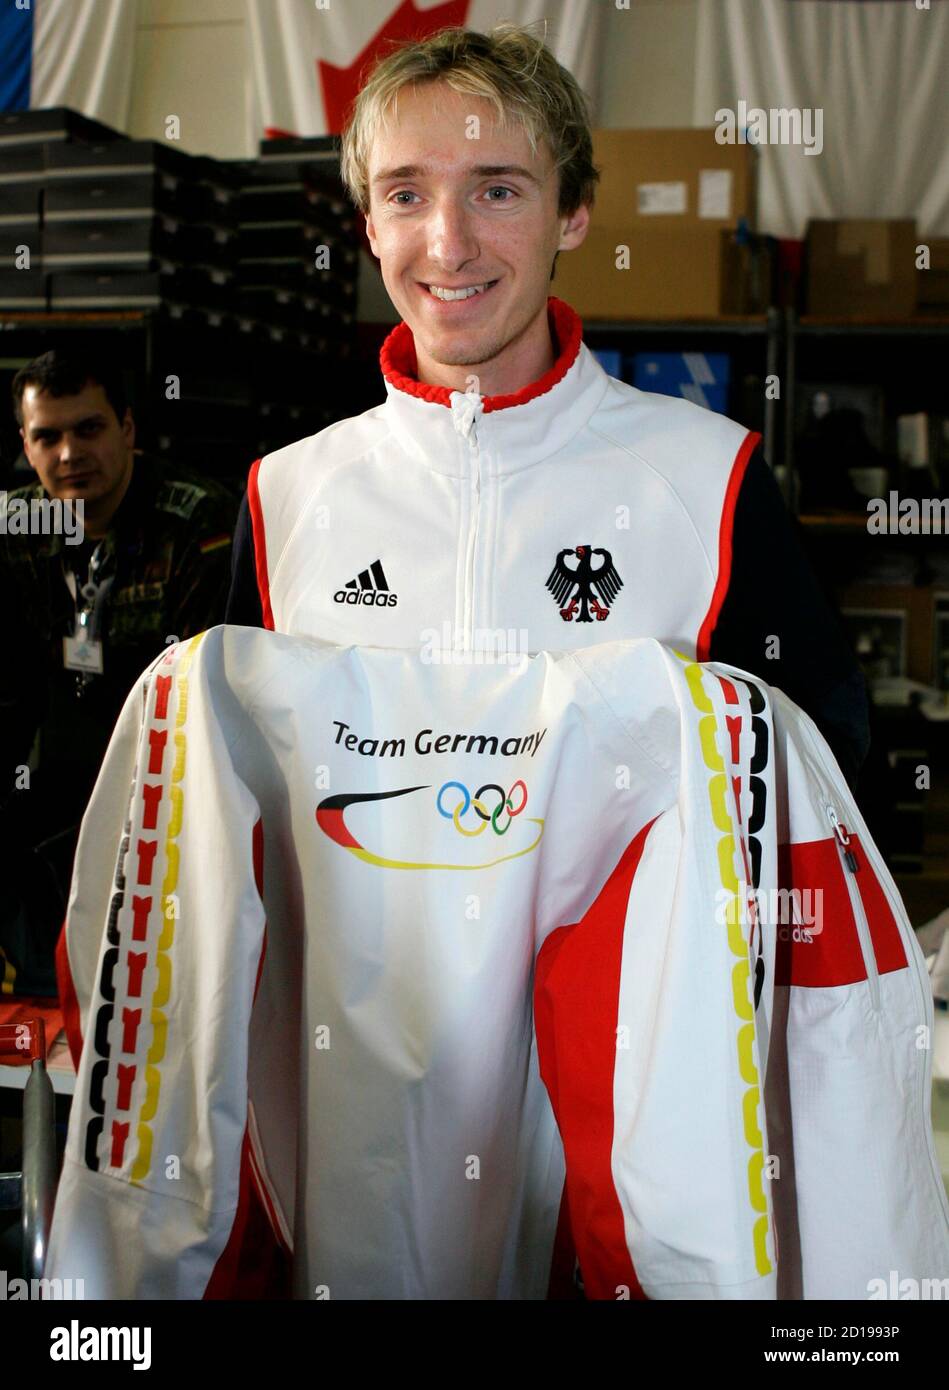 German ski jumper Michael Uhrmann, poses with a jacket during the official  German Winter Olympic kit